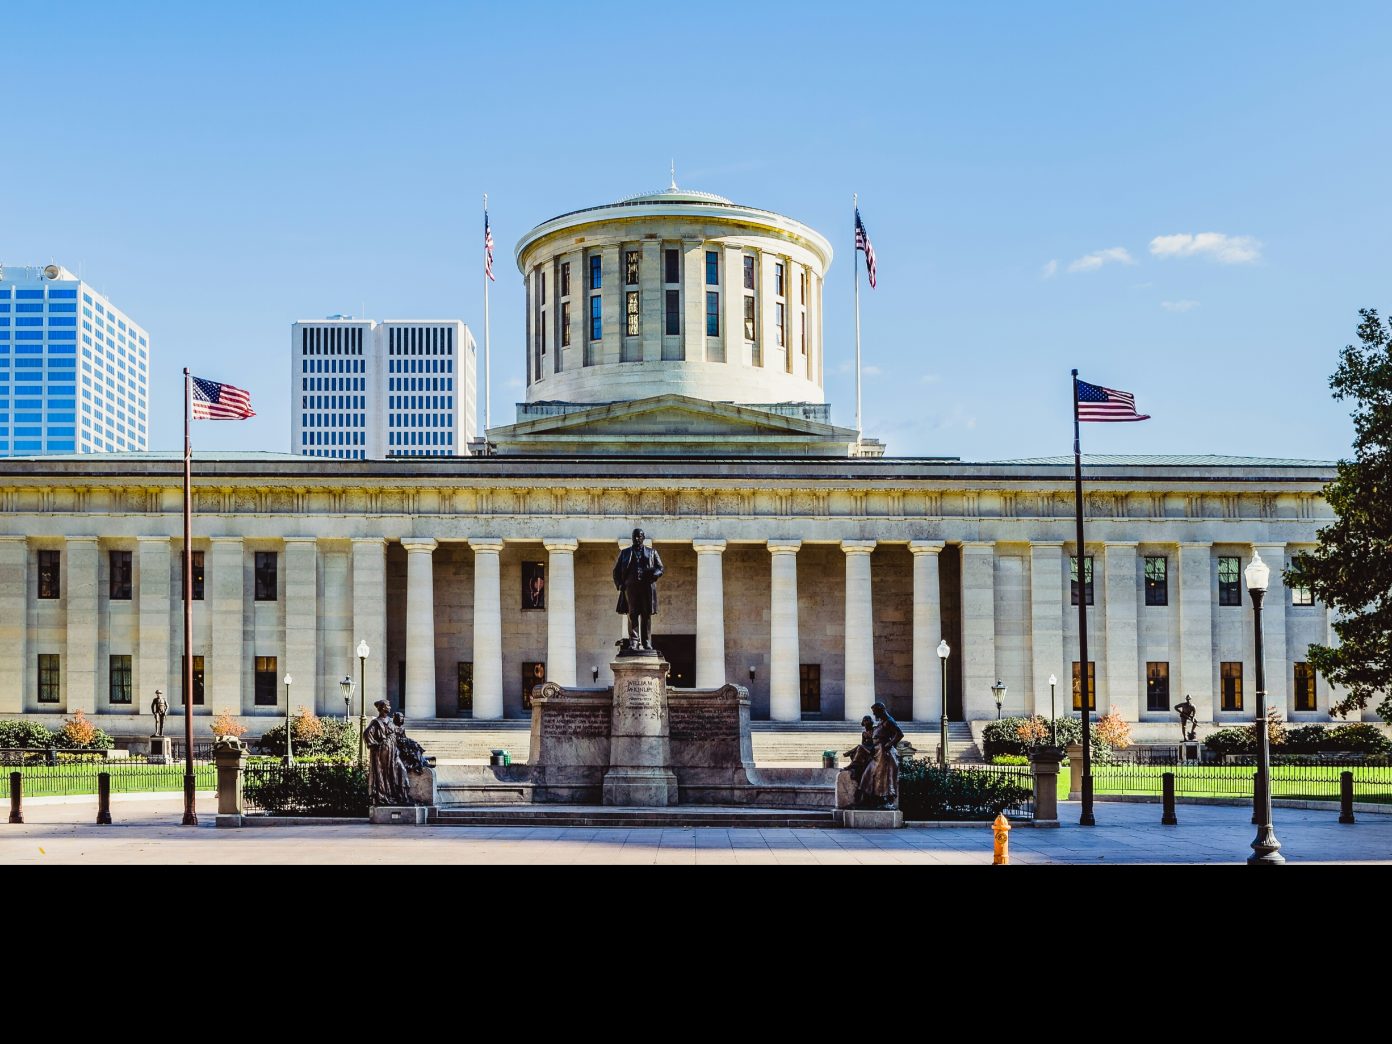 Ohio Companies Now Paying Tax in BTC, Says State Treasurer